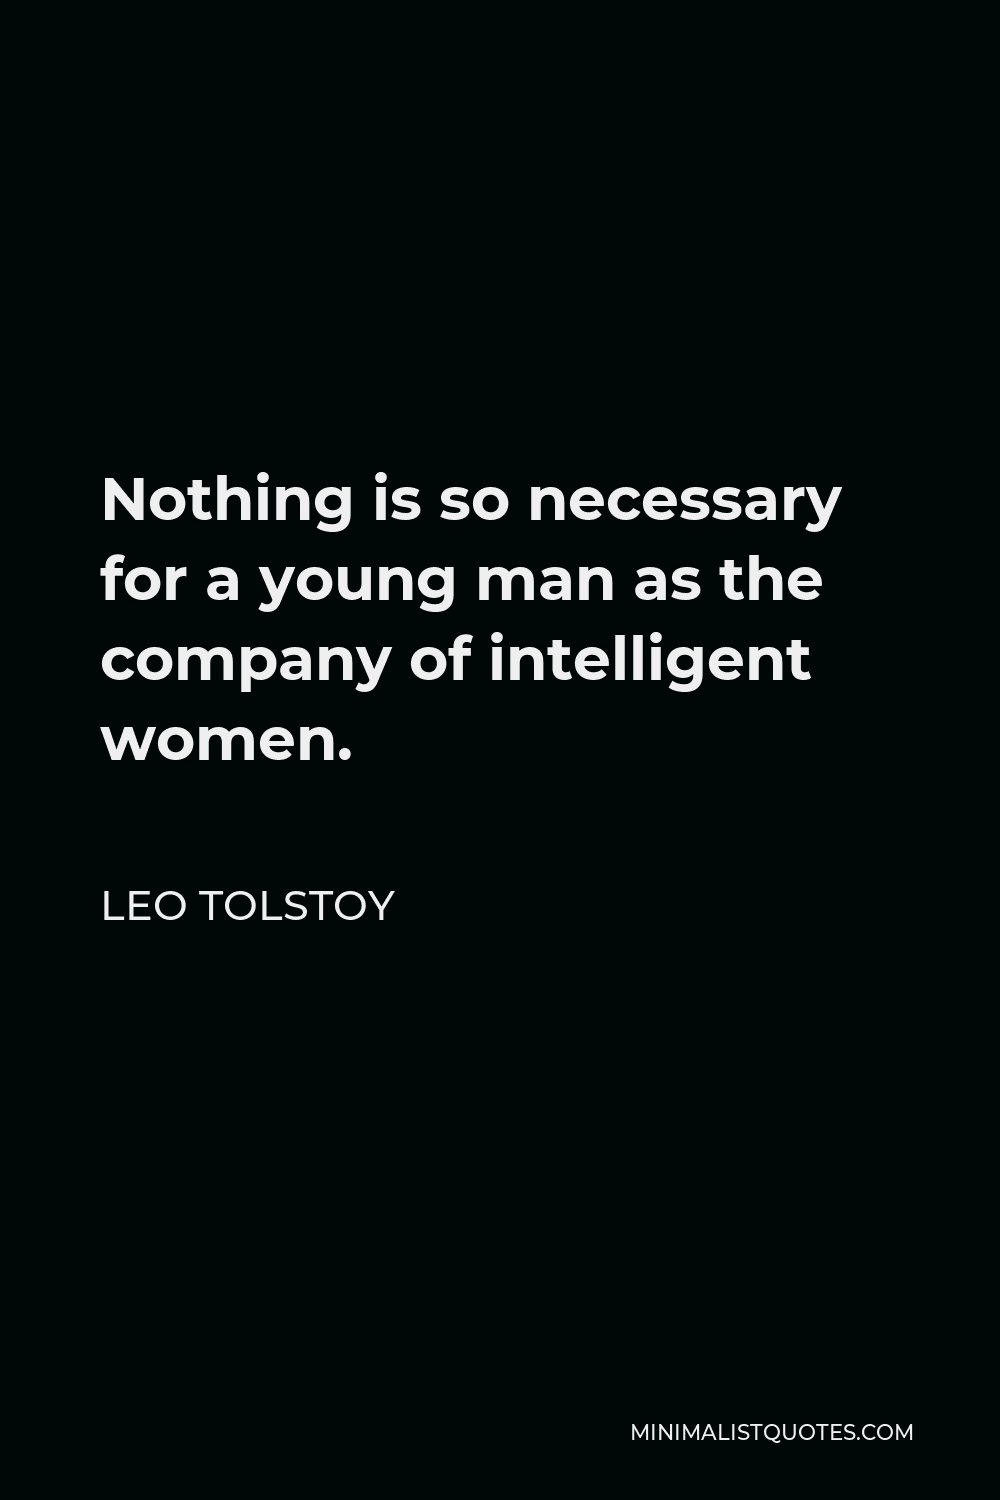 Leo Tolstoy Quote - Nothing is so necessary for a young man as the company of intelligent women.